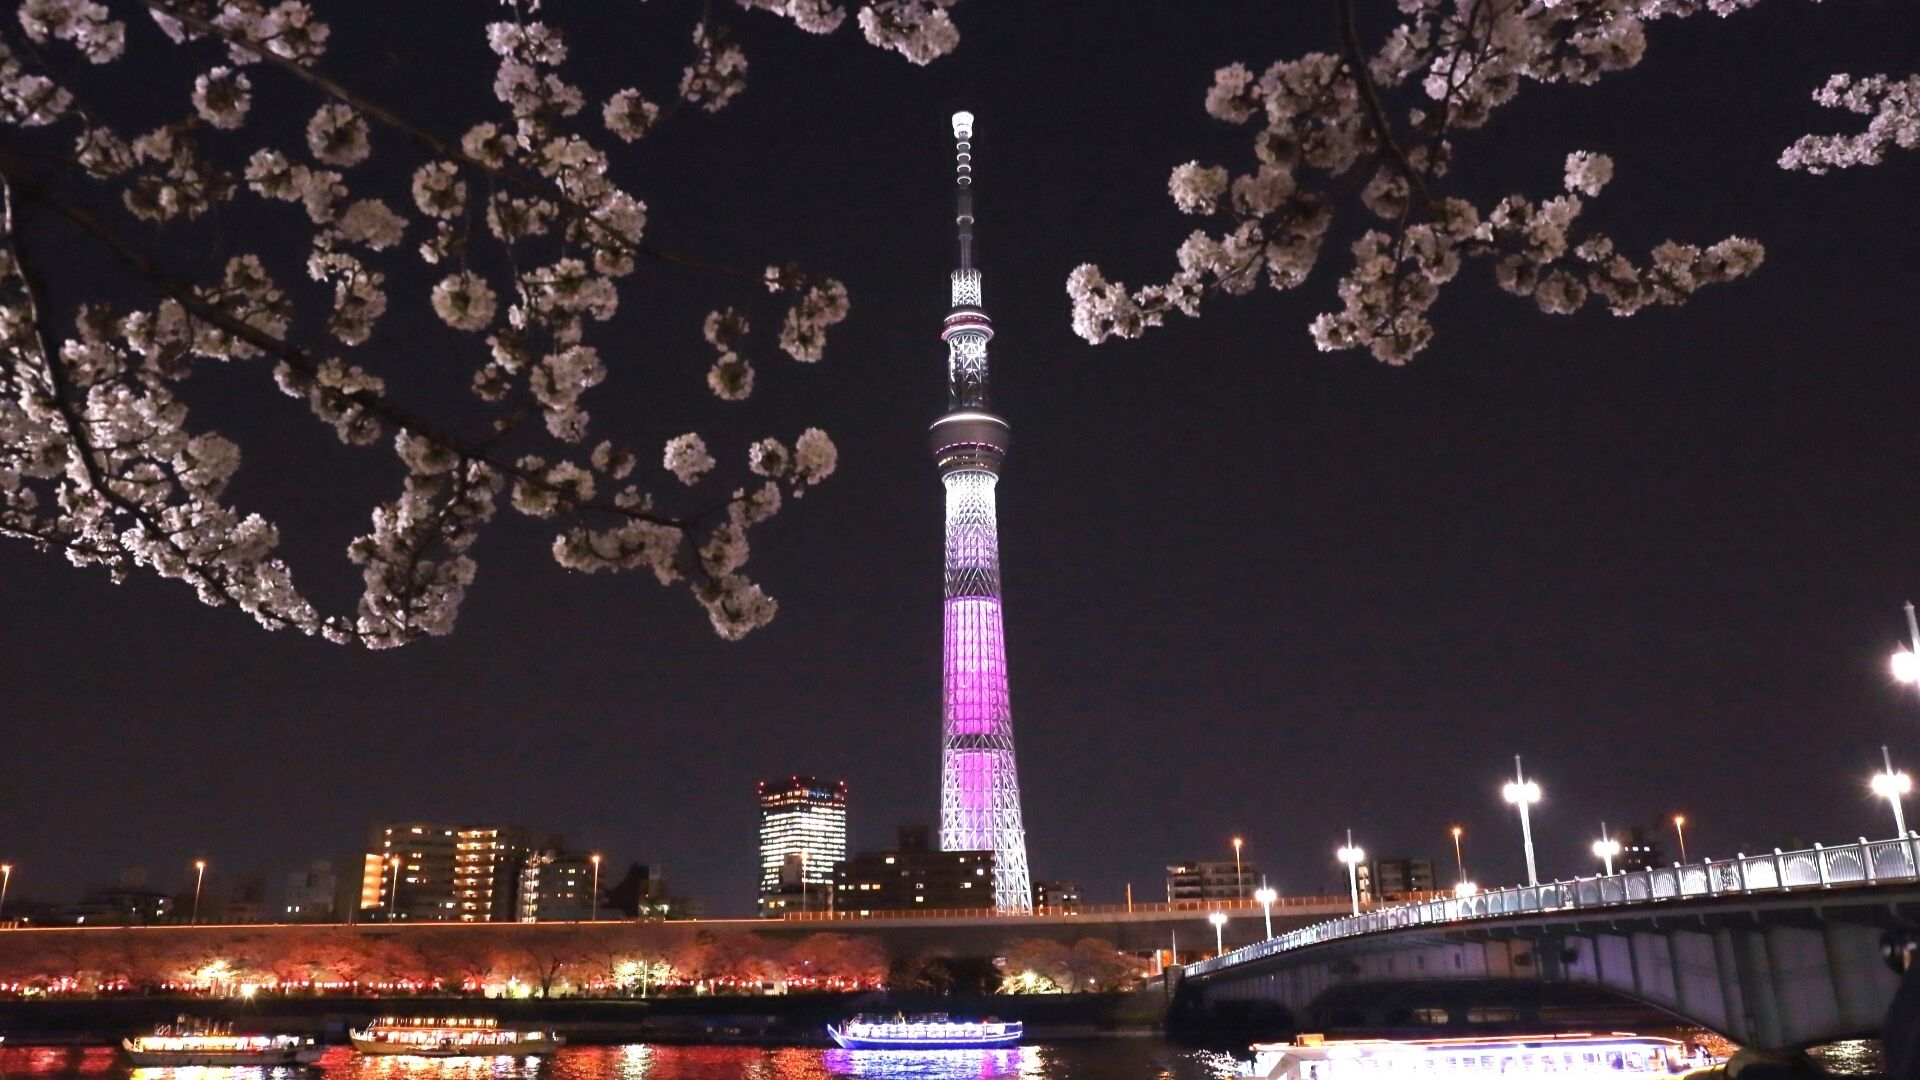 Best Cherry Blossom Events in Tokyo 2021